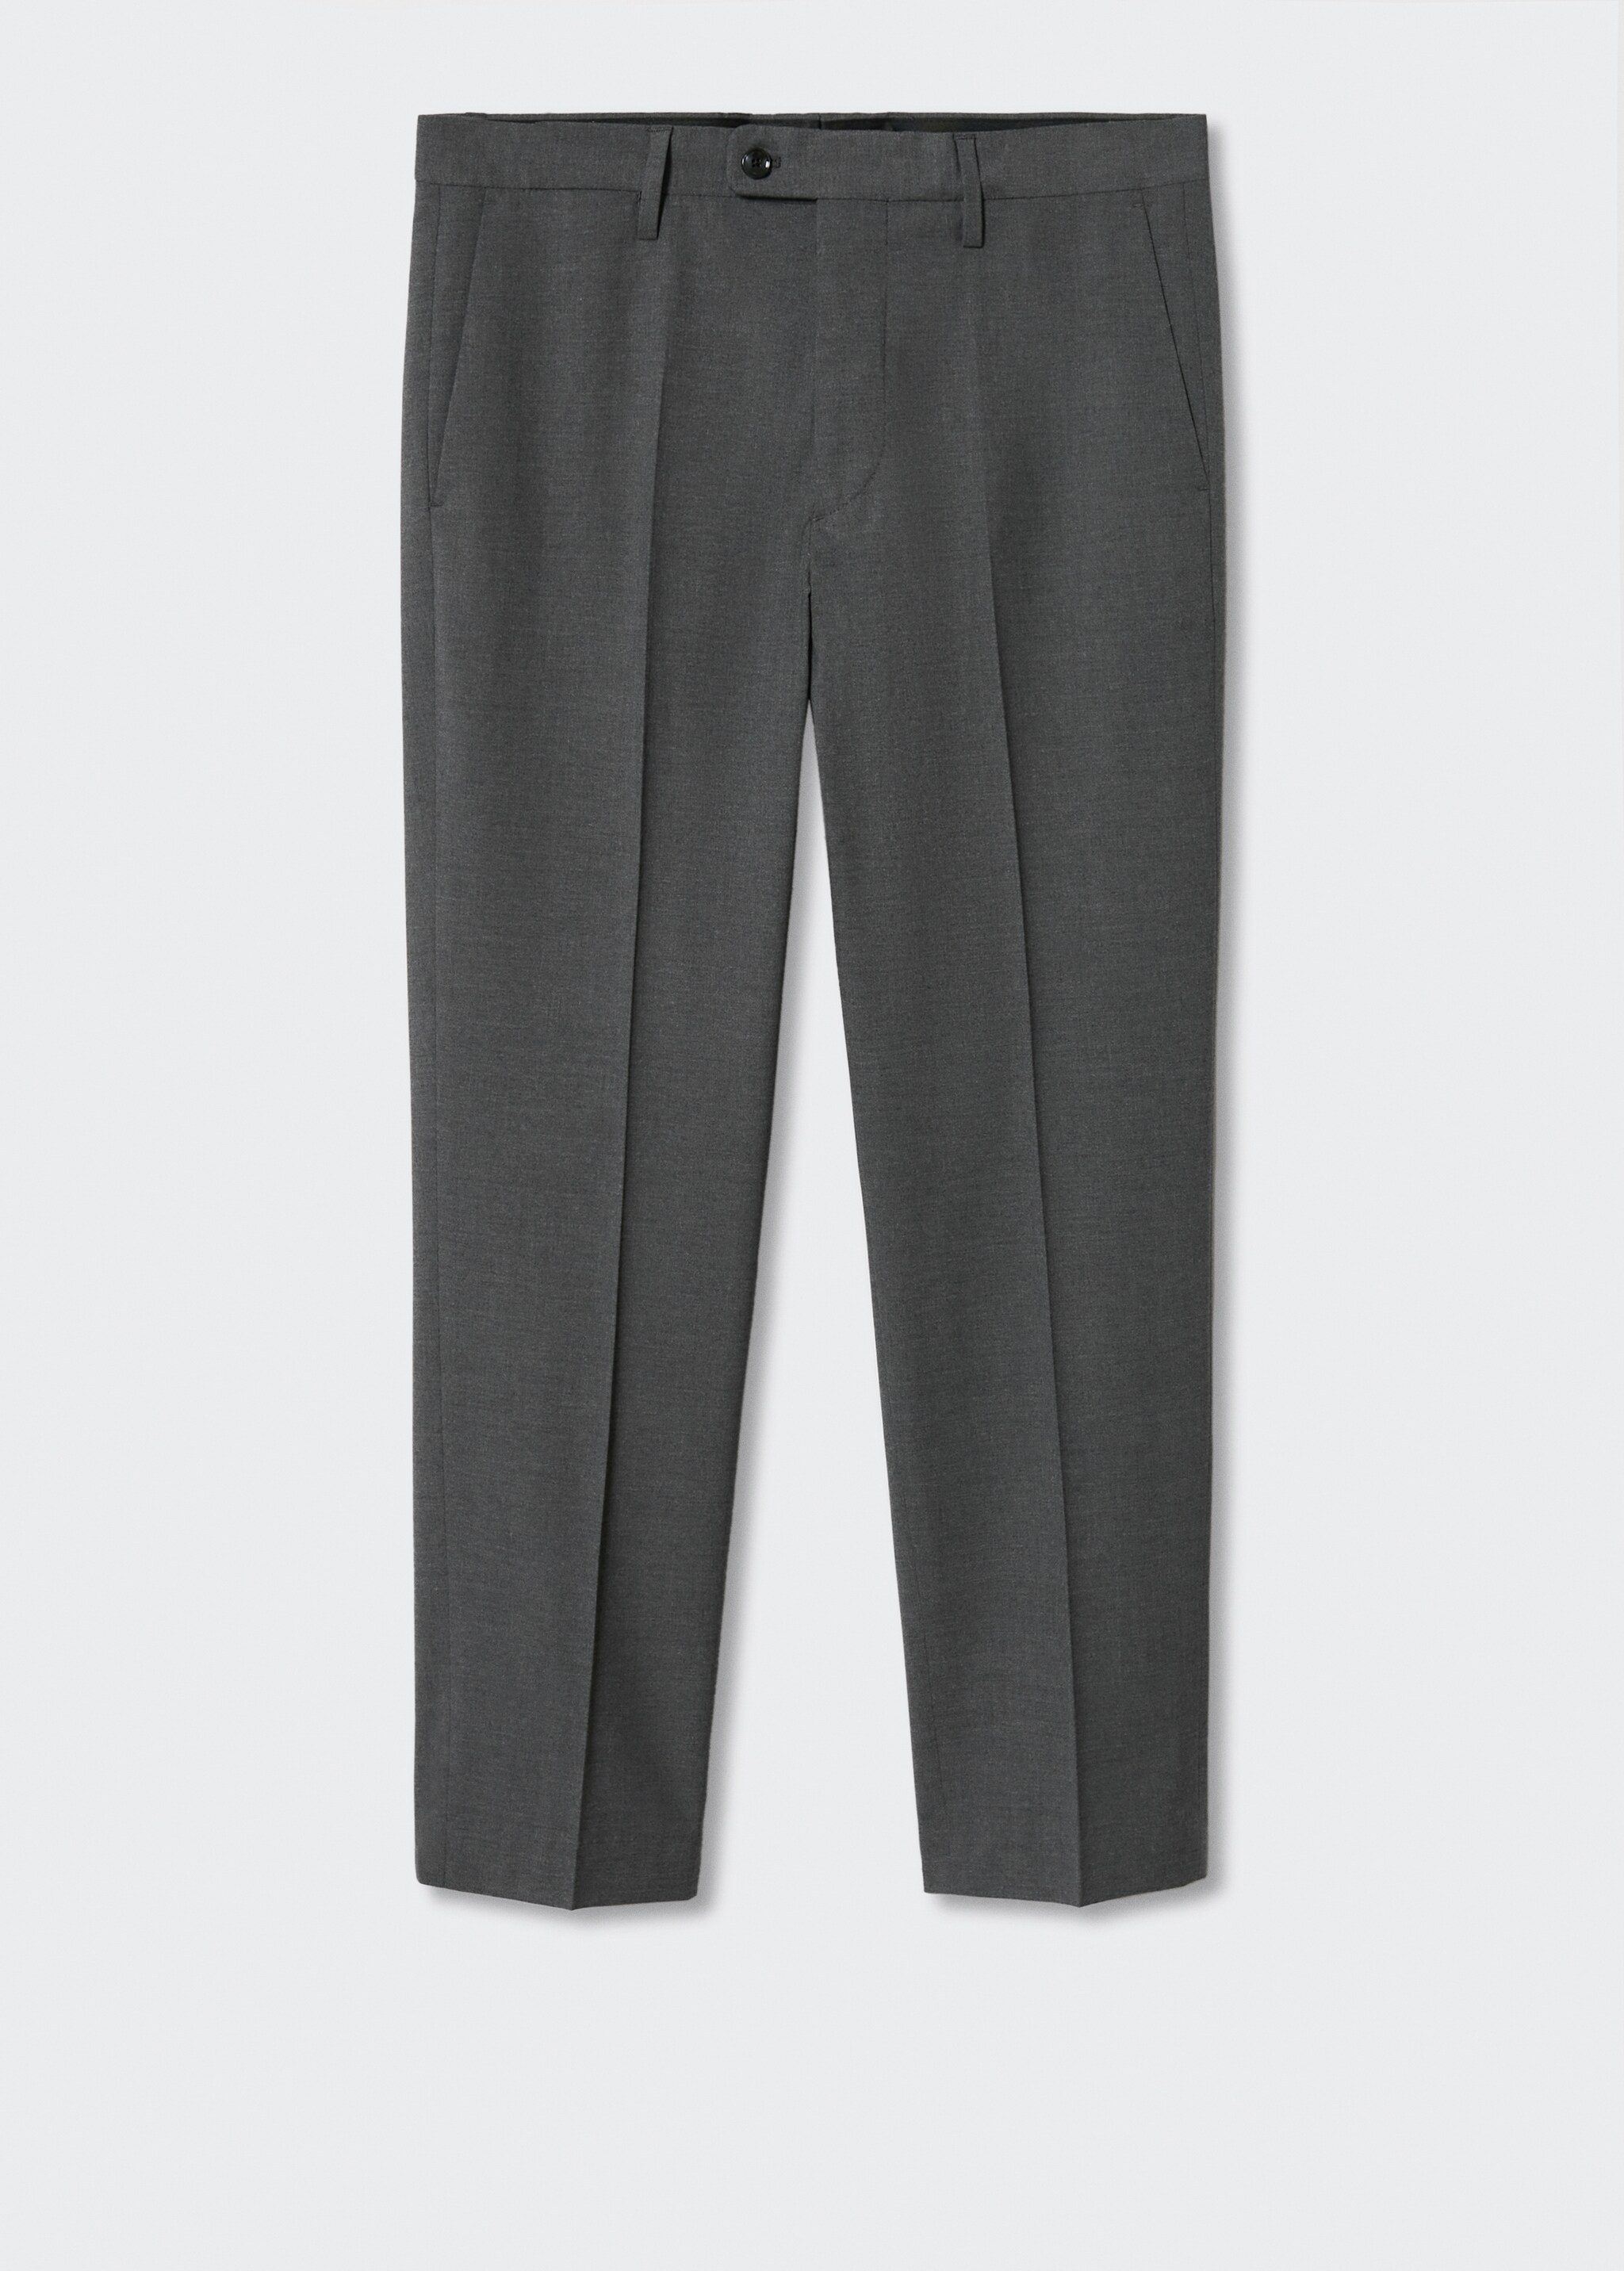  Suit trousers - Article without model